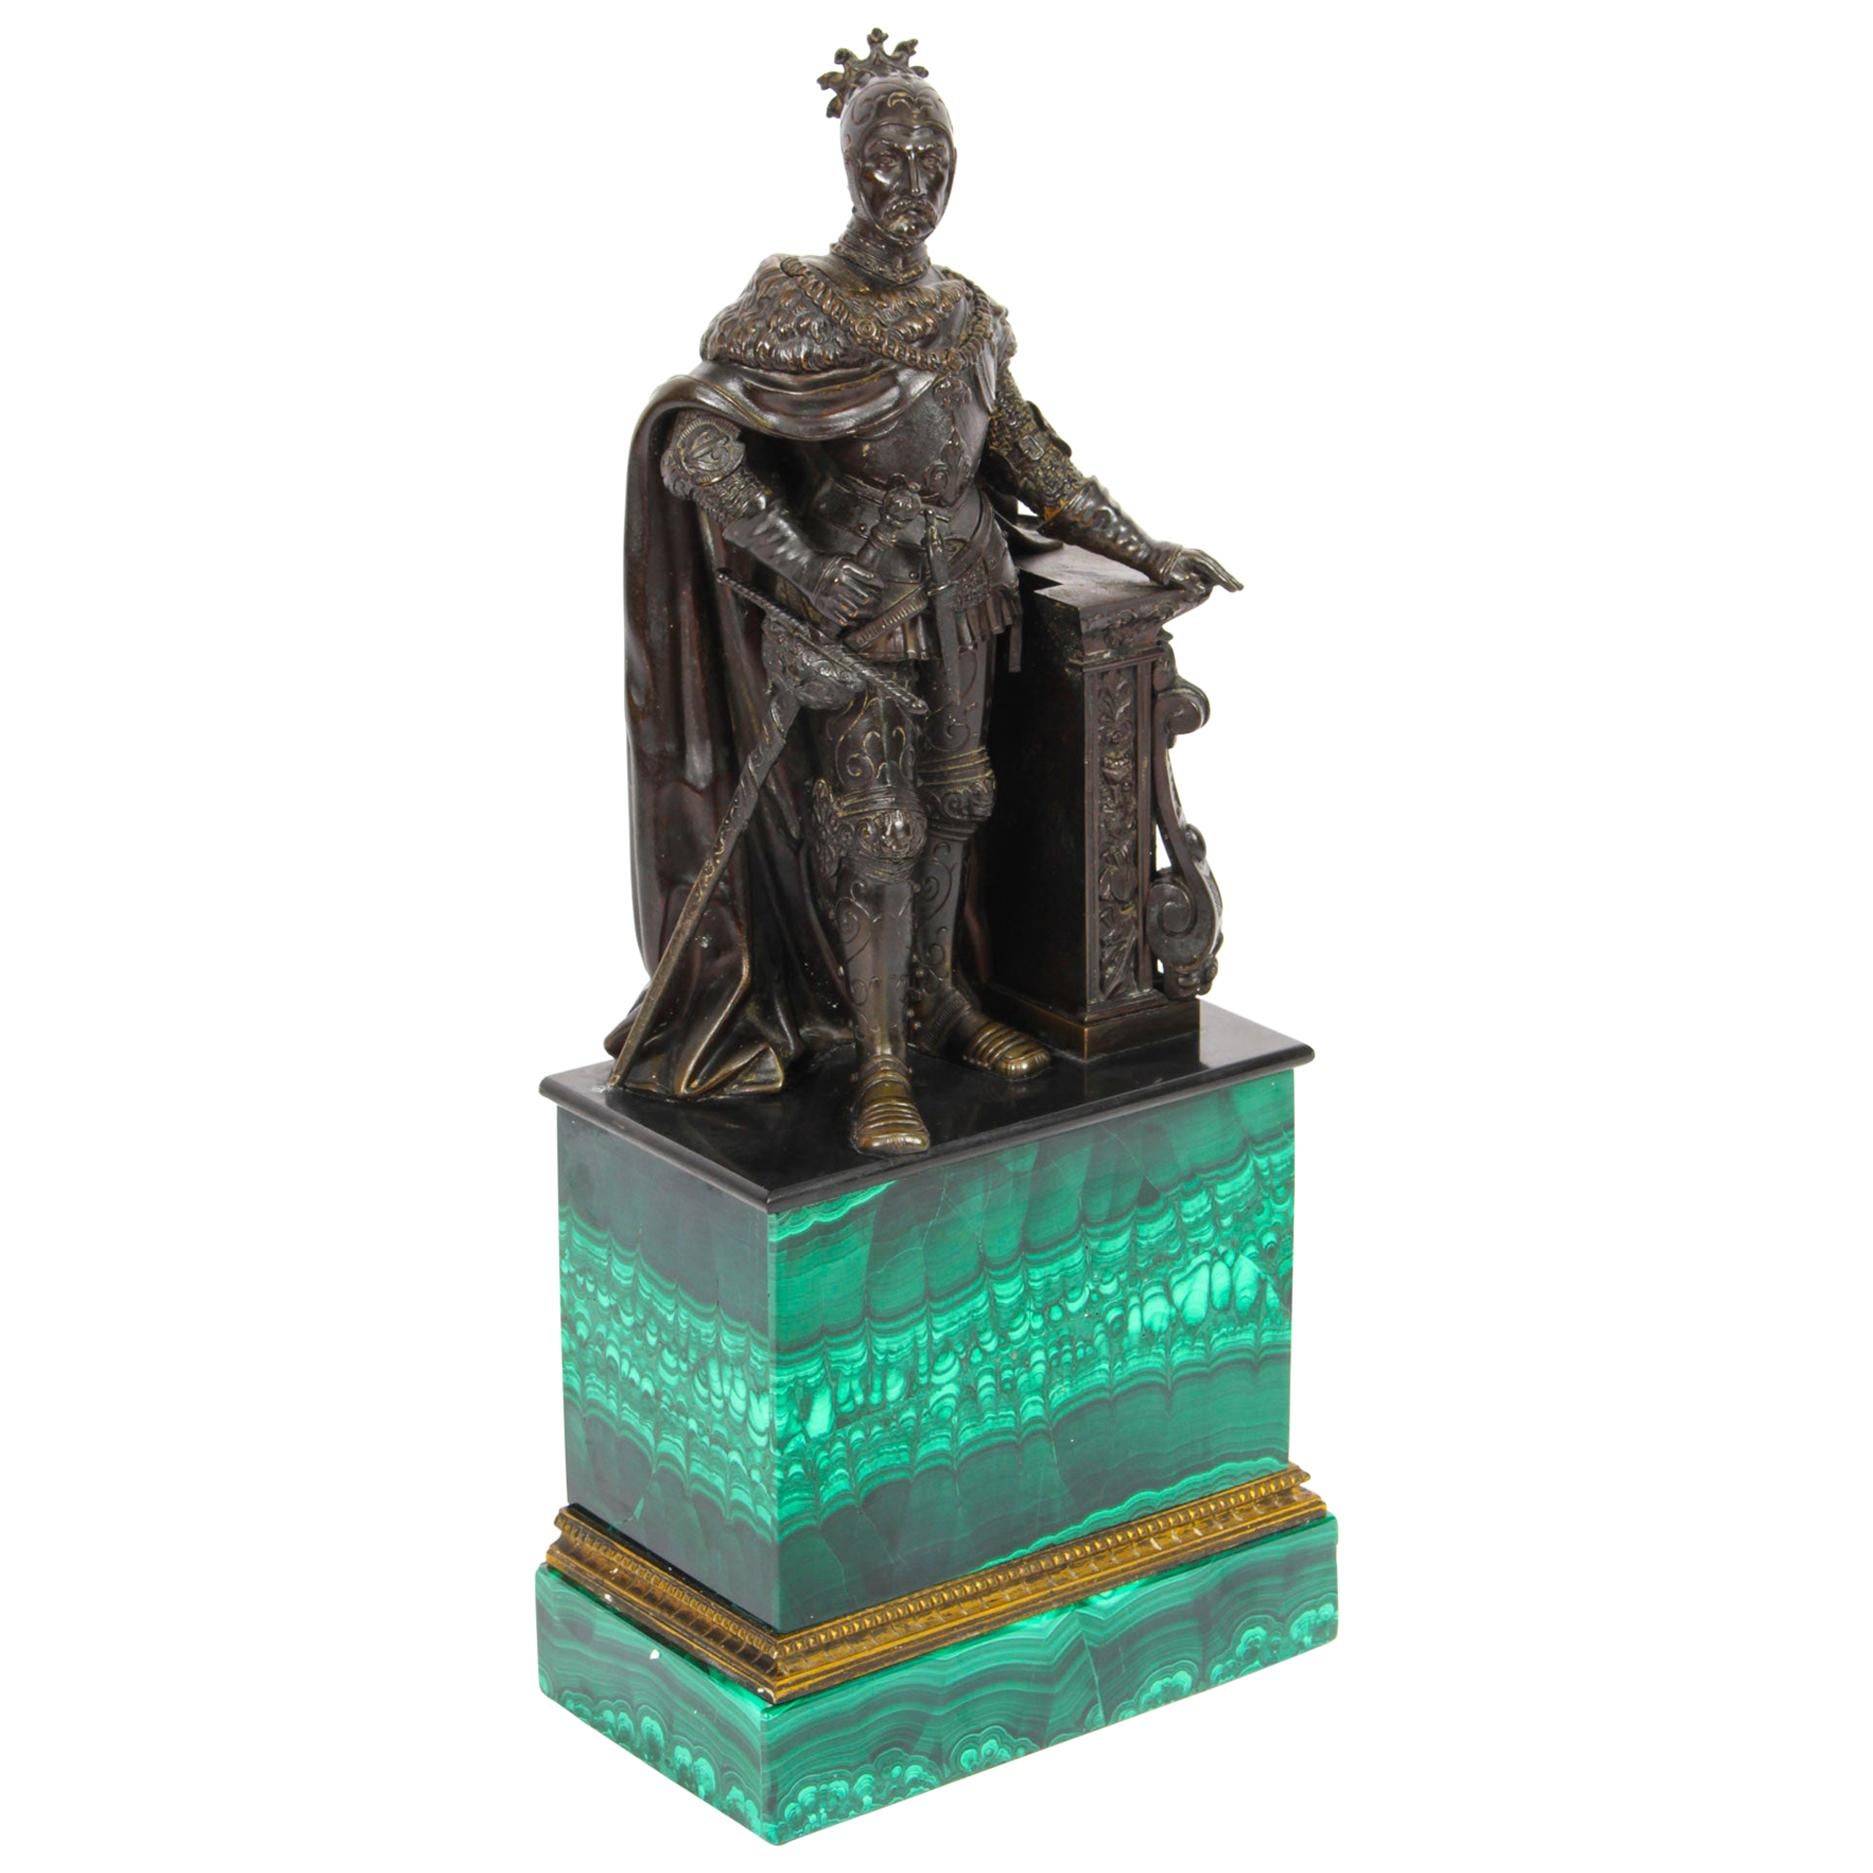 Antique French Malachite & Bronze Sculpture of a Knight in Armour, 19th C